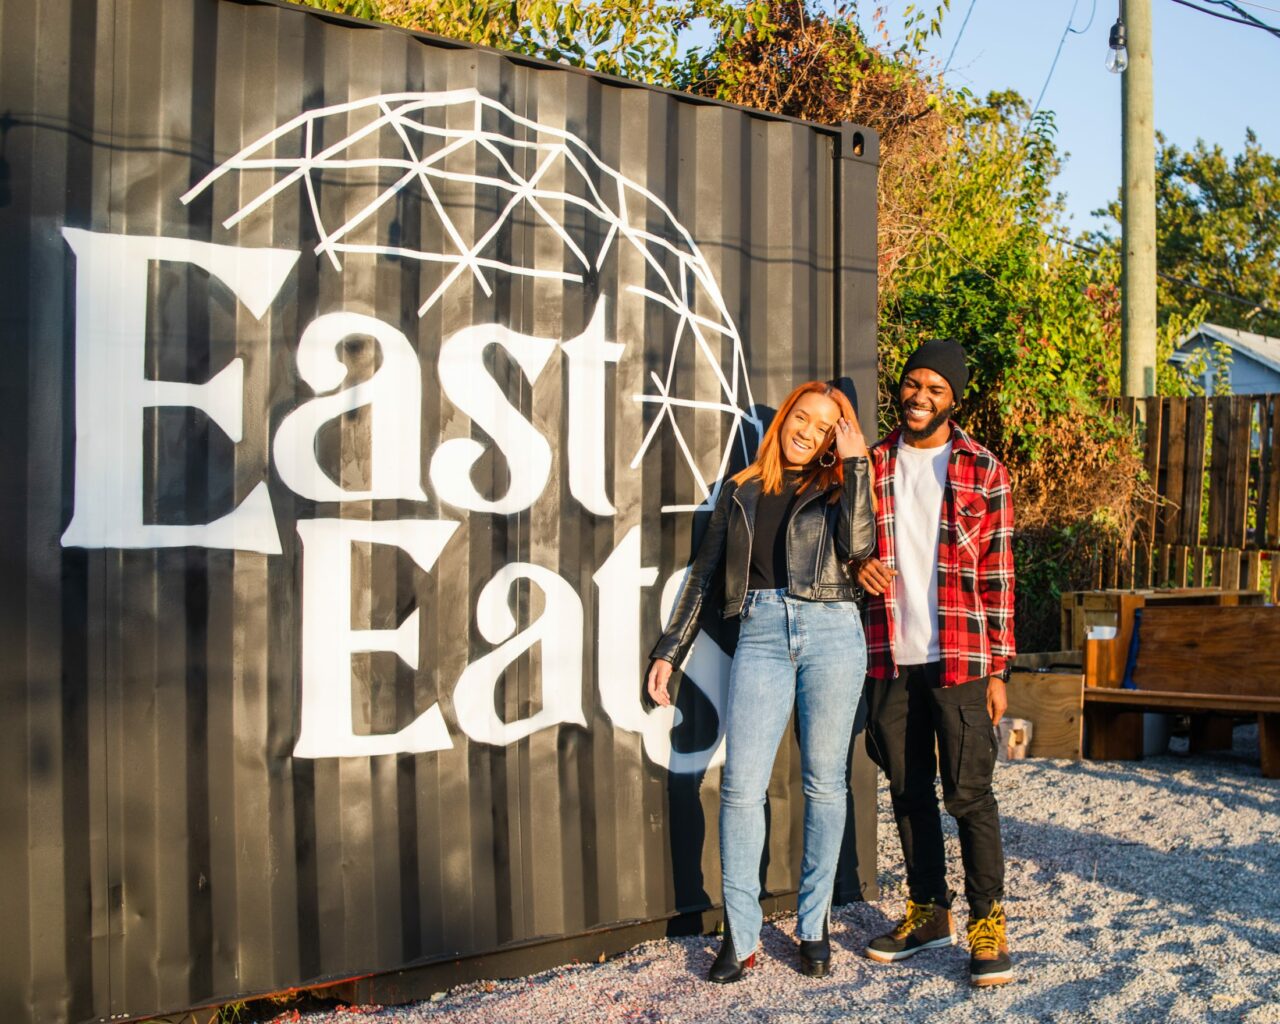 Opening weekend at East Eats